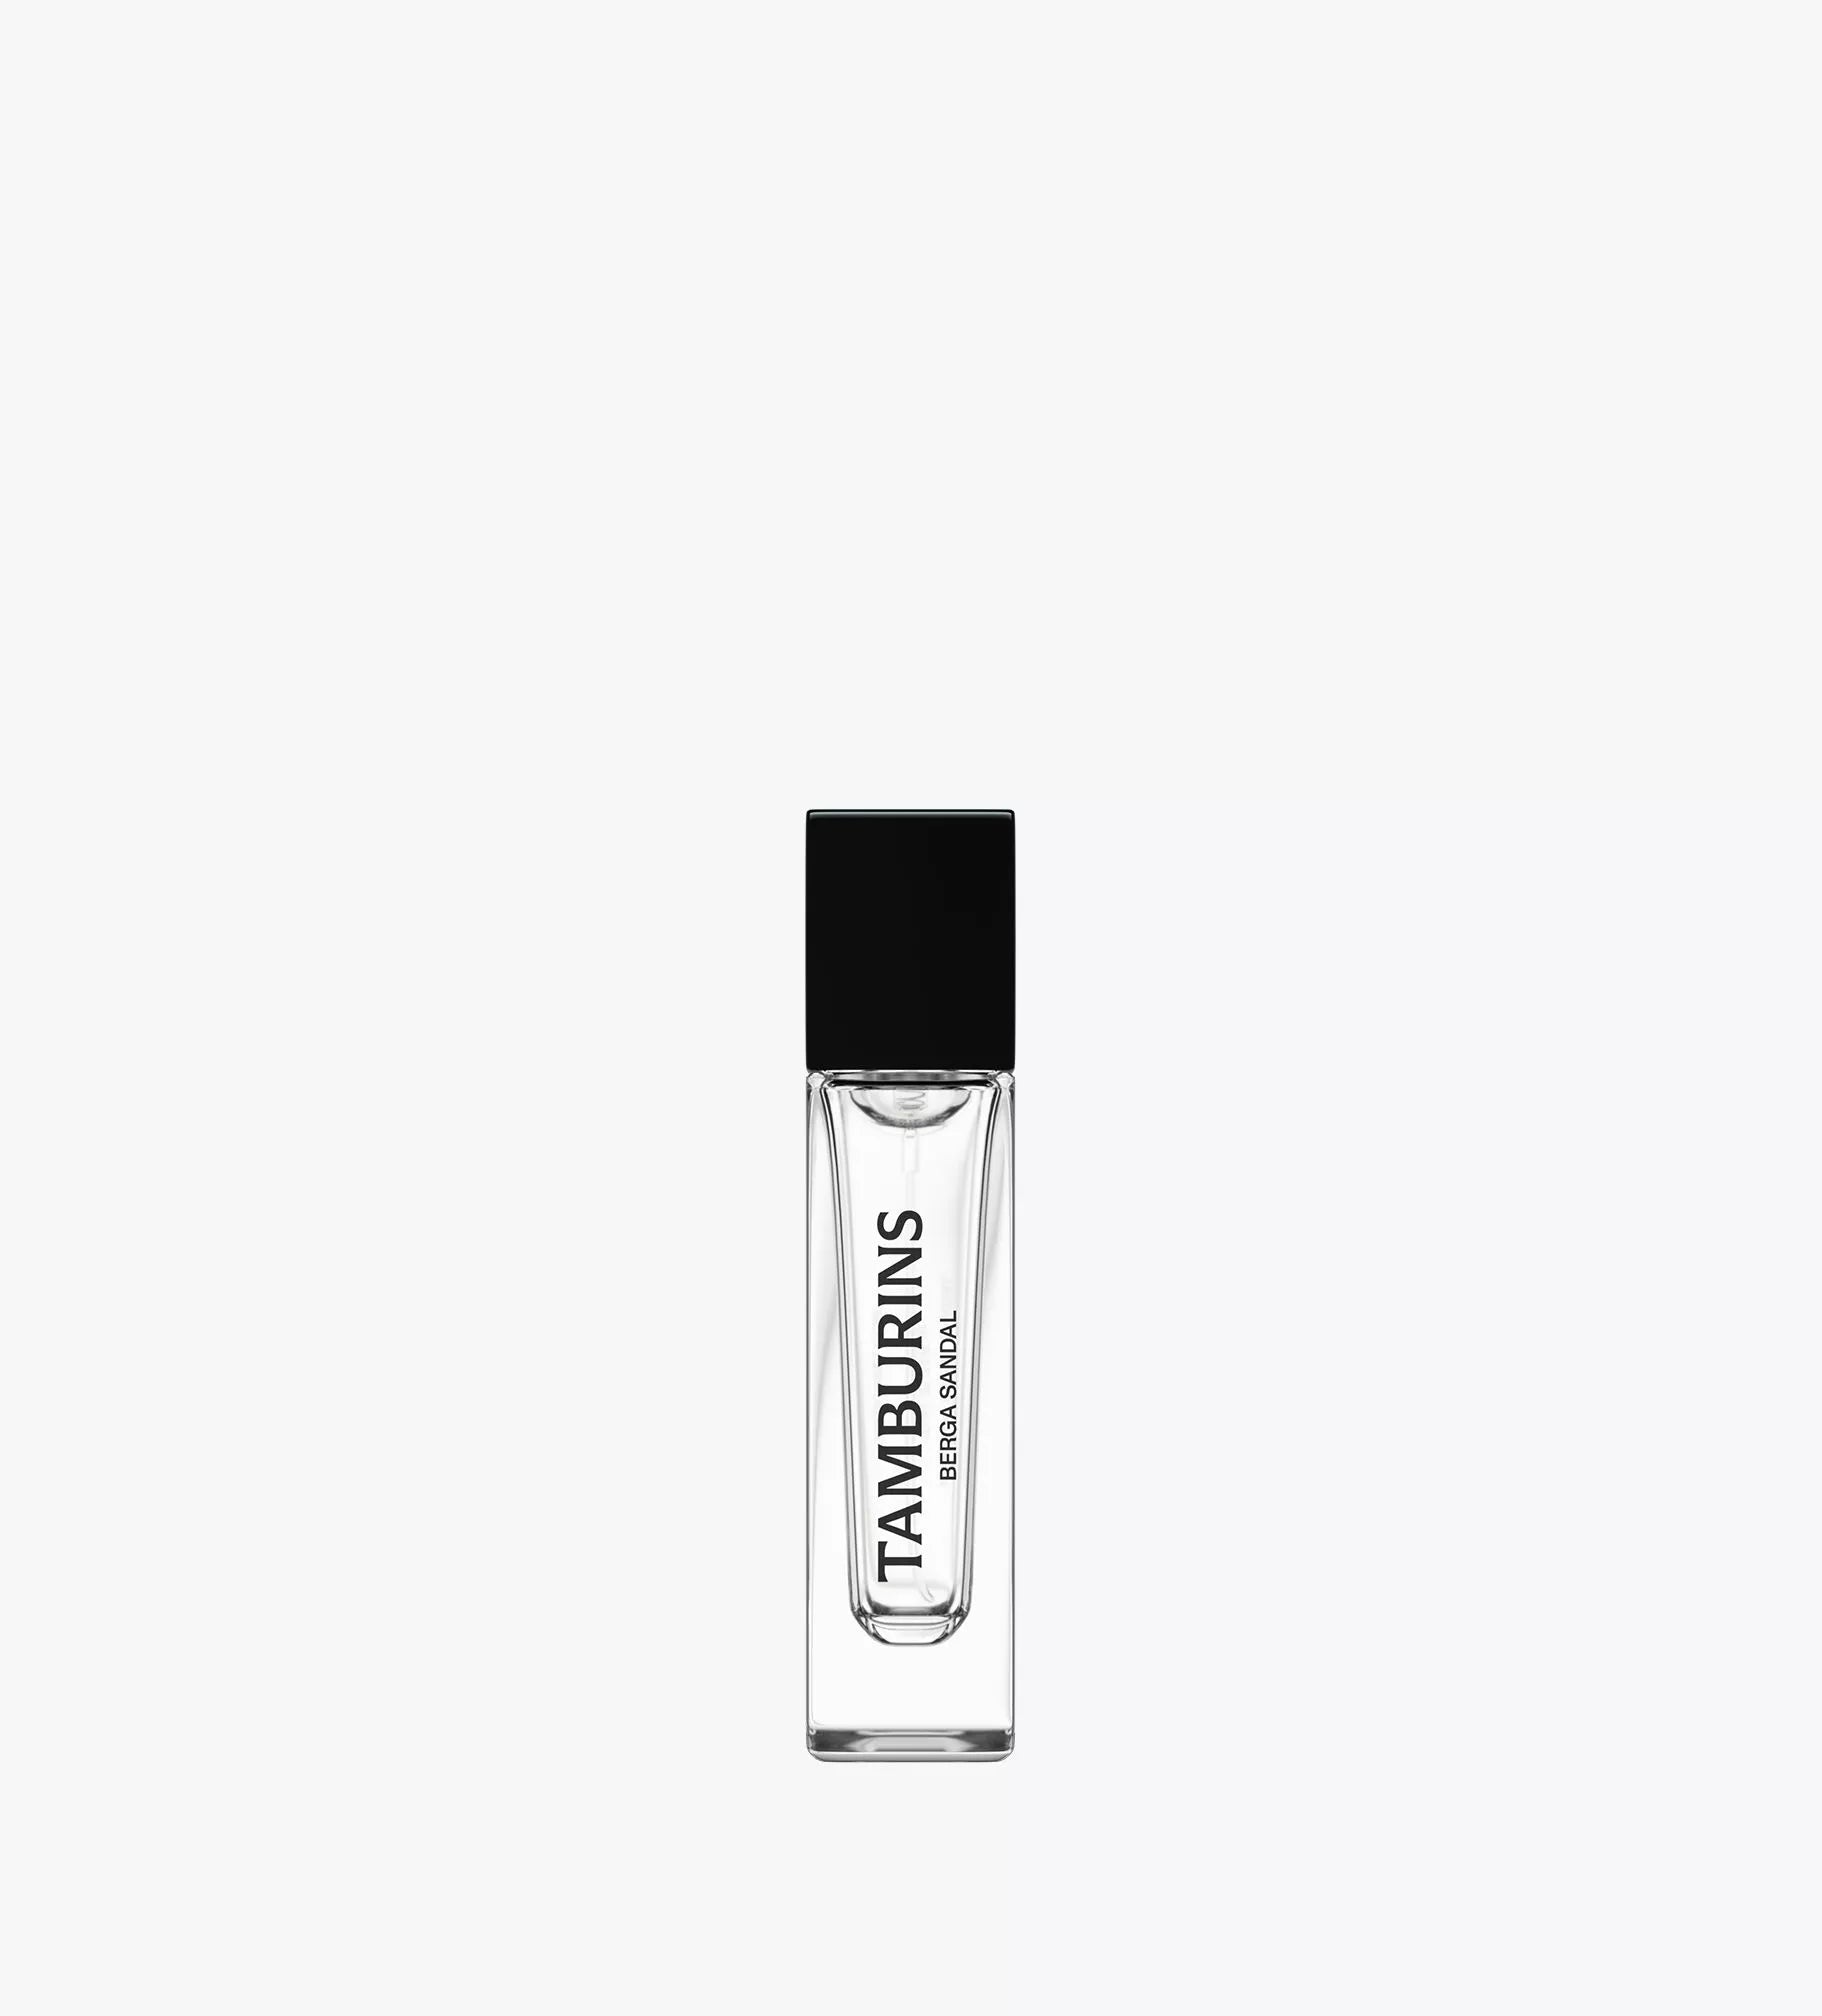  A chic bottle of TAMBURINS Perfume #BERGA SANDAL 11ml, sitting on a clean white background.